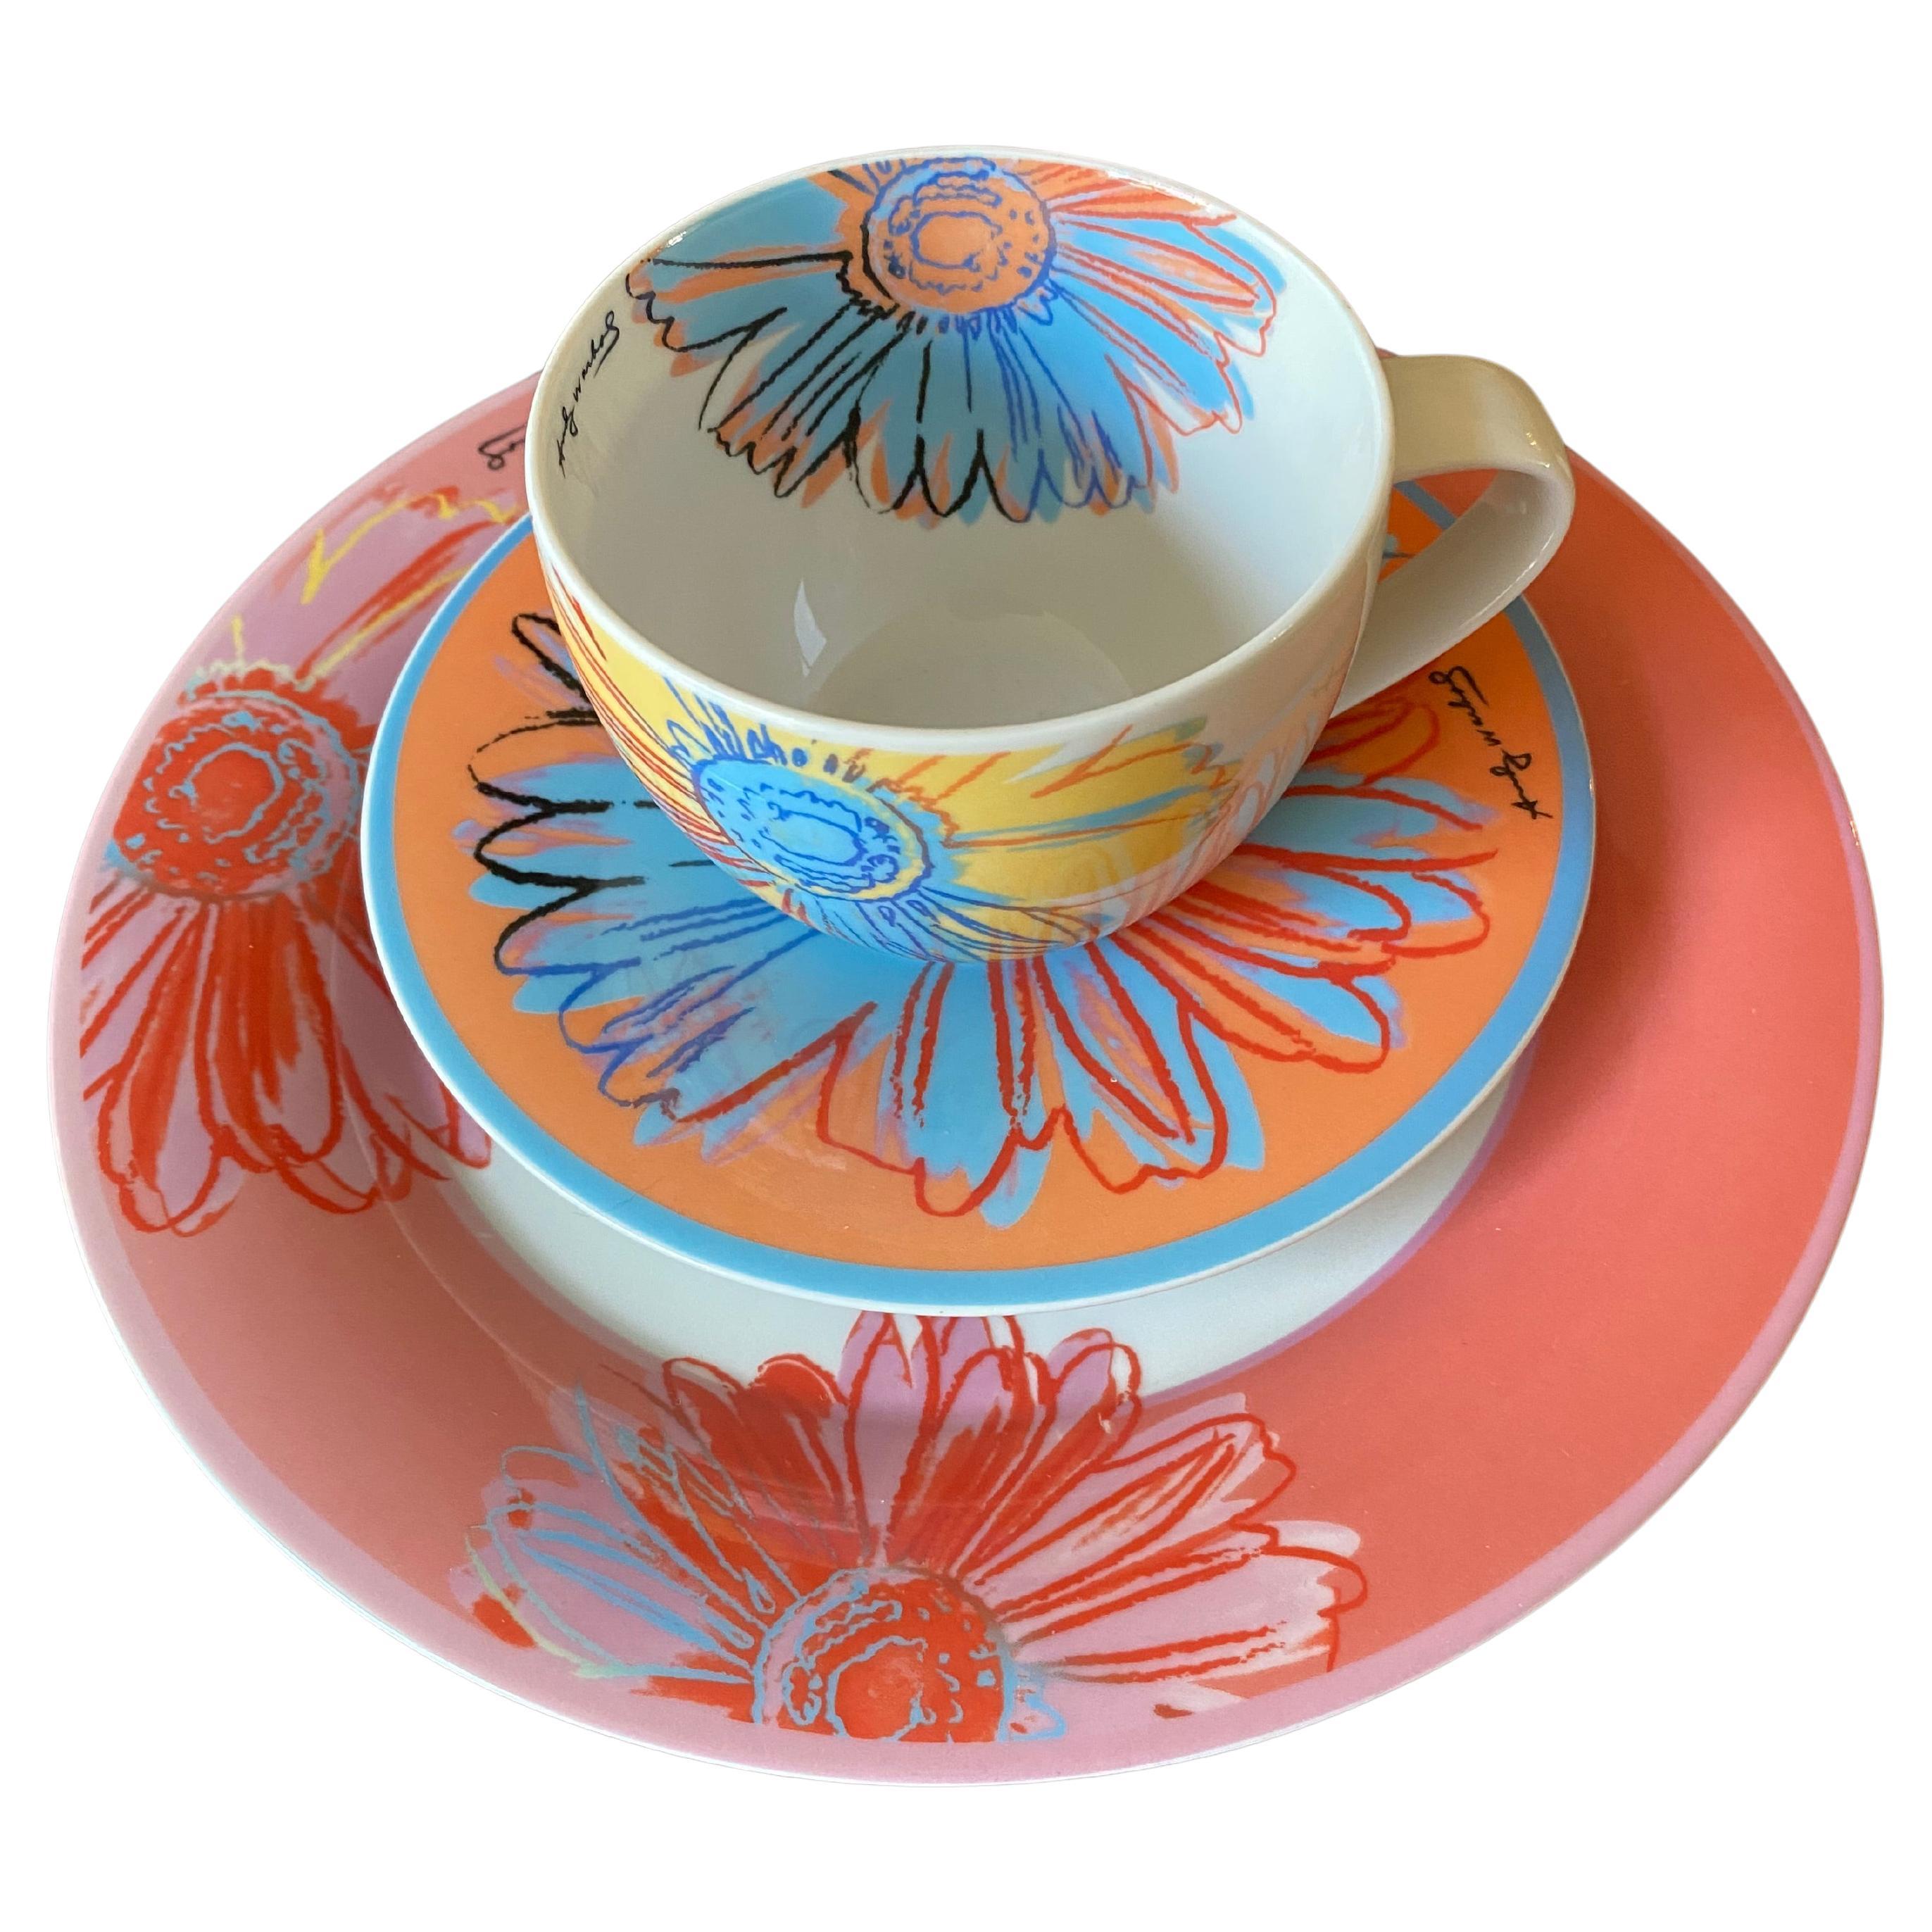 Rosenthal Andy Warhol Daisy Breakfast Sets (price for 3 sets) For Sale